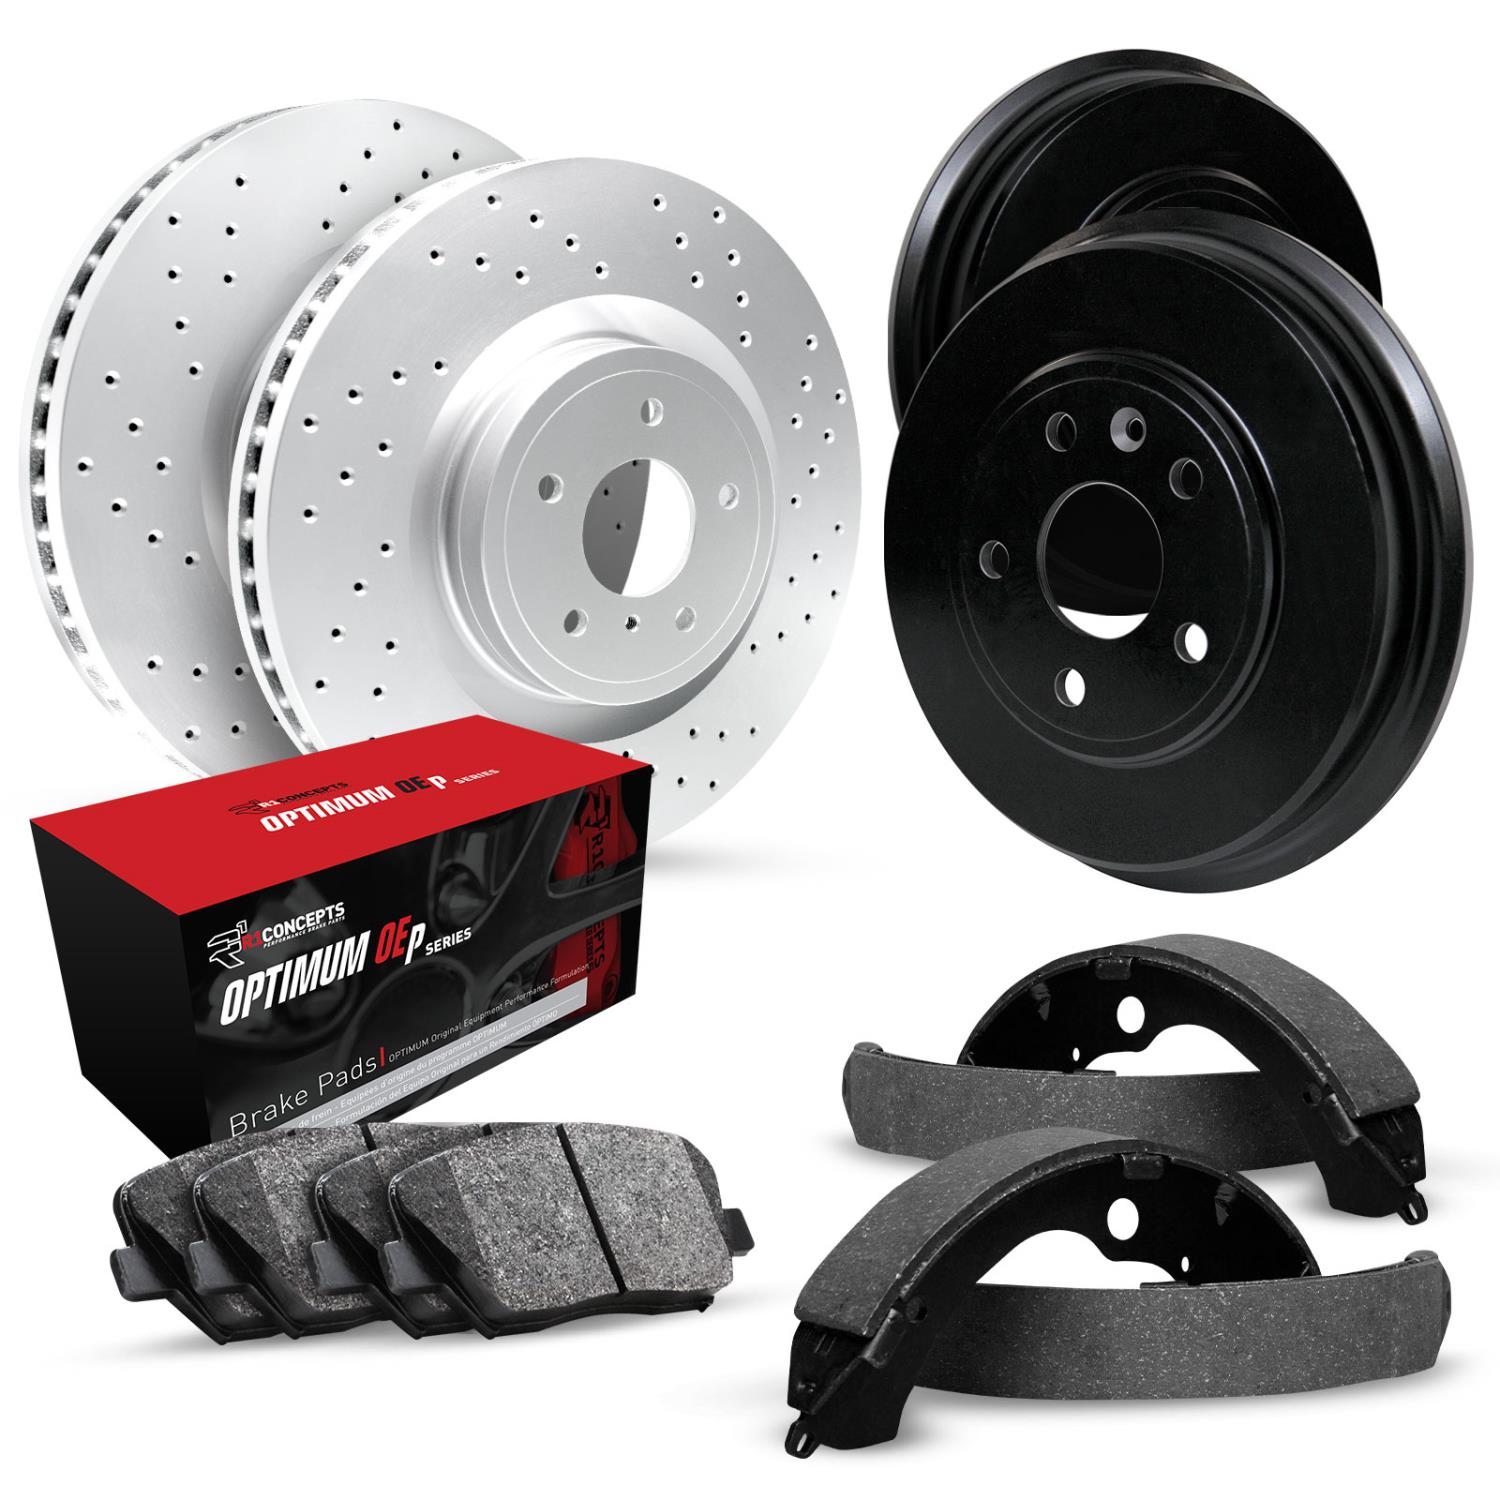 GEO-Carbon Drilled Brake Rotor & Drum Set w/Optimum OE Pads & Shoes, 1971-1990 GM, Position: Front & Rear